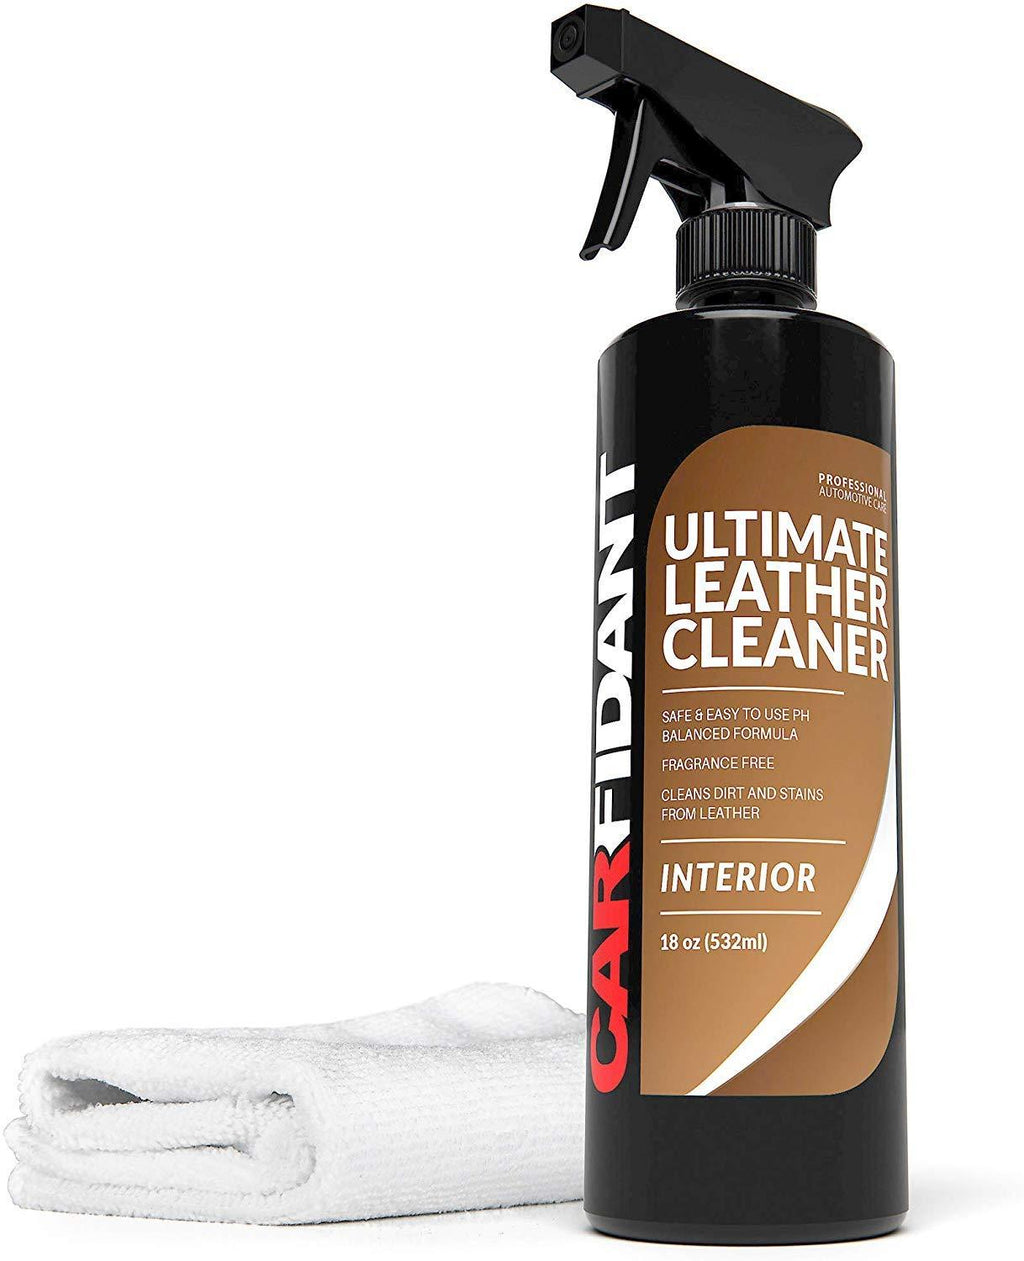  [AUSTRALIA] - Carfidant Ultimate Leather Cleaner - Full Leather & Vinyl Cleaning Kit with Microfiber Towel for Leather & Vinyl Seats, Automotive Interiors, Car Dashboards, Sofas & Purses! - 18oz Kit